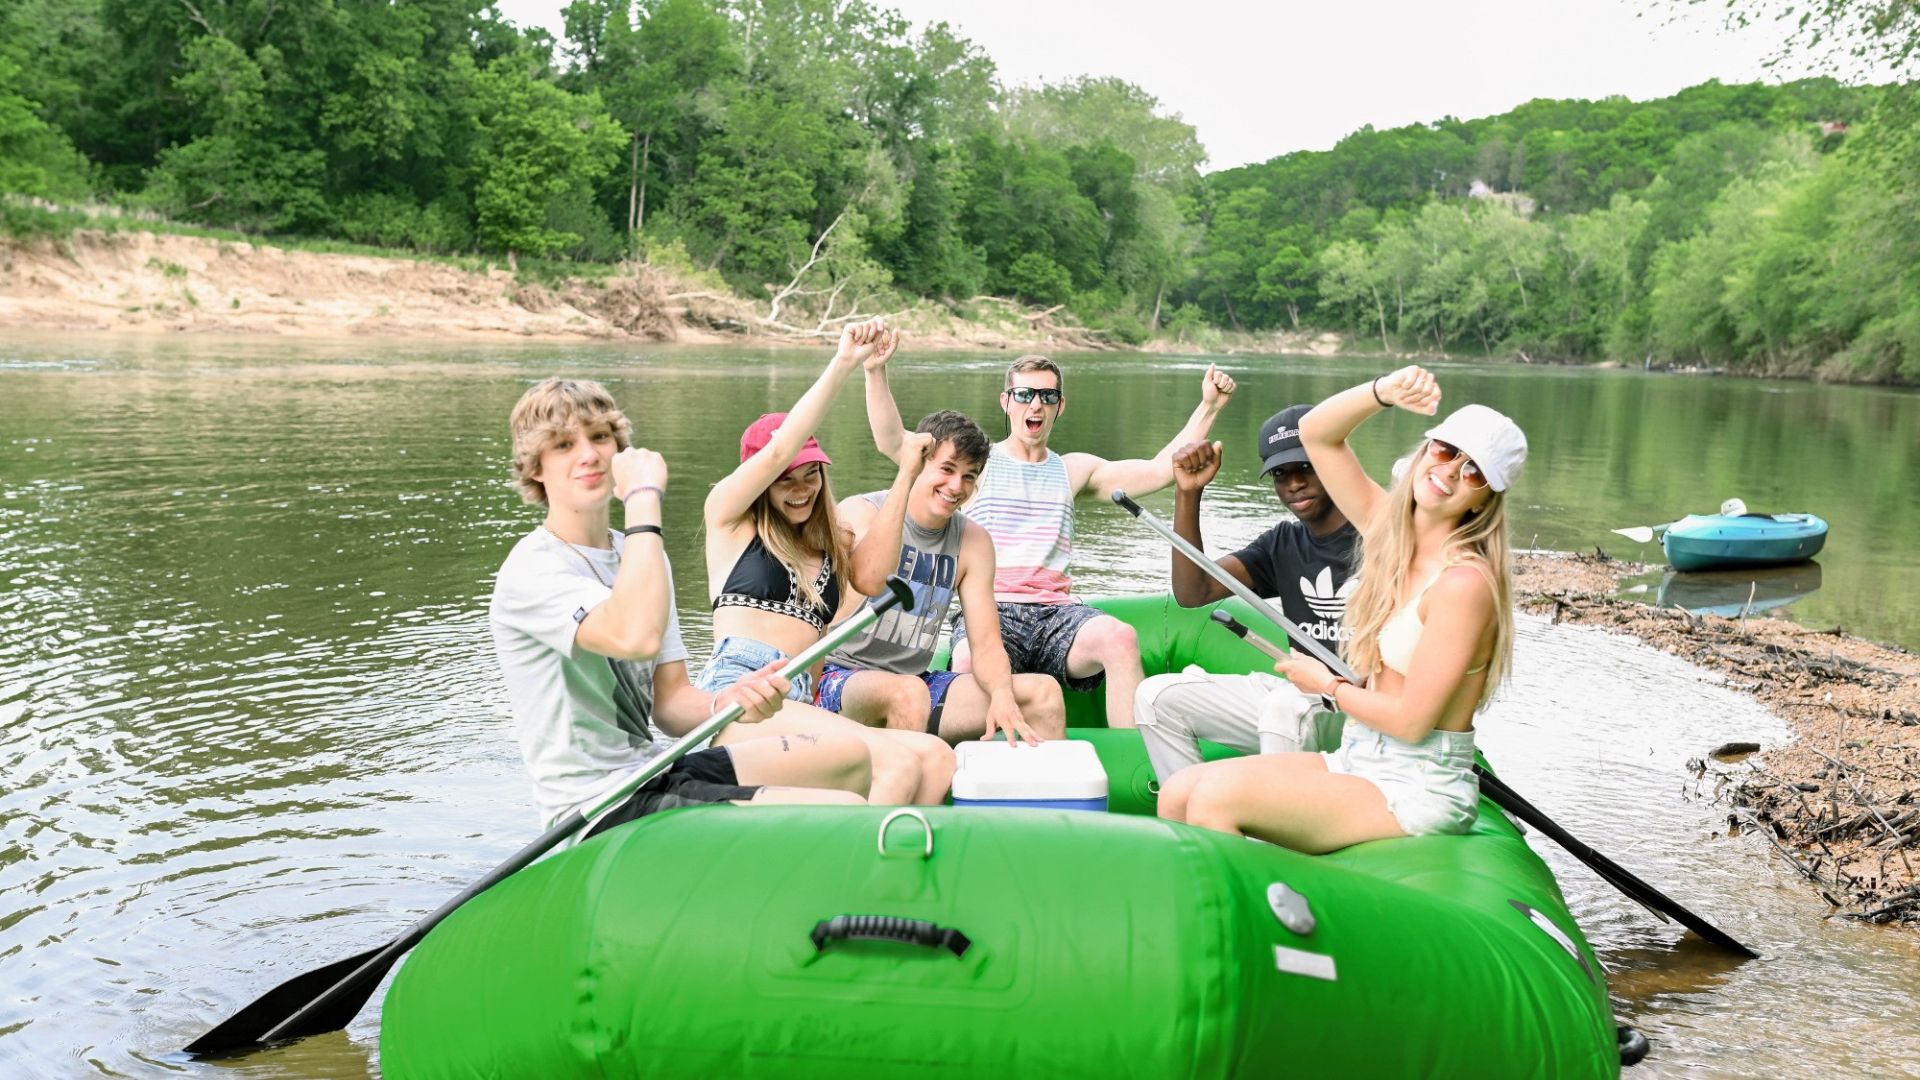 Brookdale Farms offers canoe, kayak, raft and inner tube rentals so that outdoor enthusiasts can experience the magic of St. Louis' Great Rivers on a float trip.